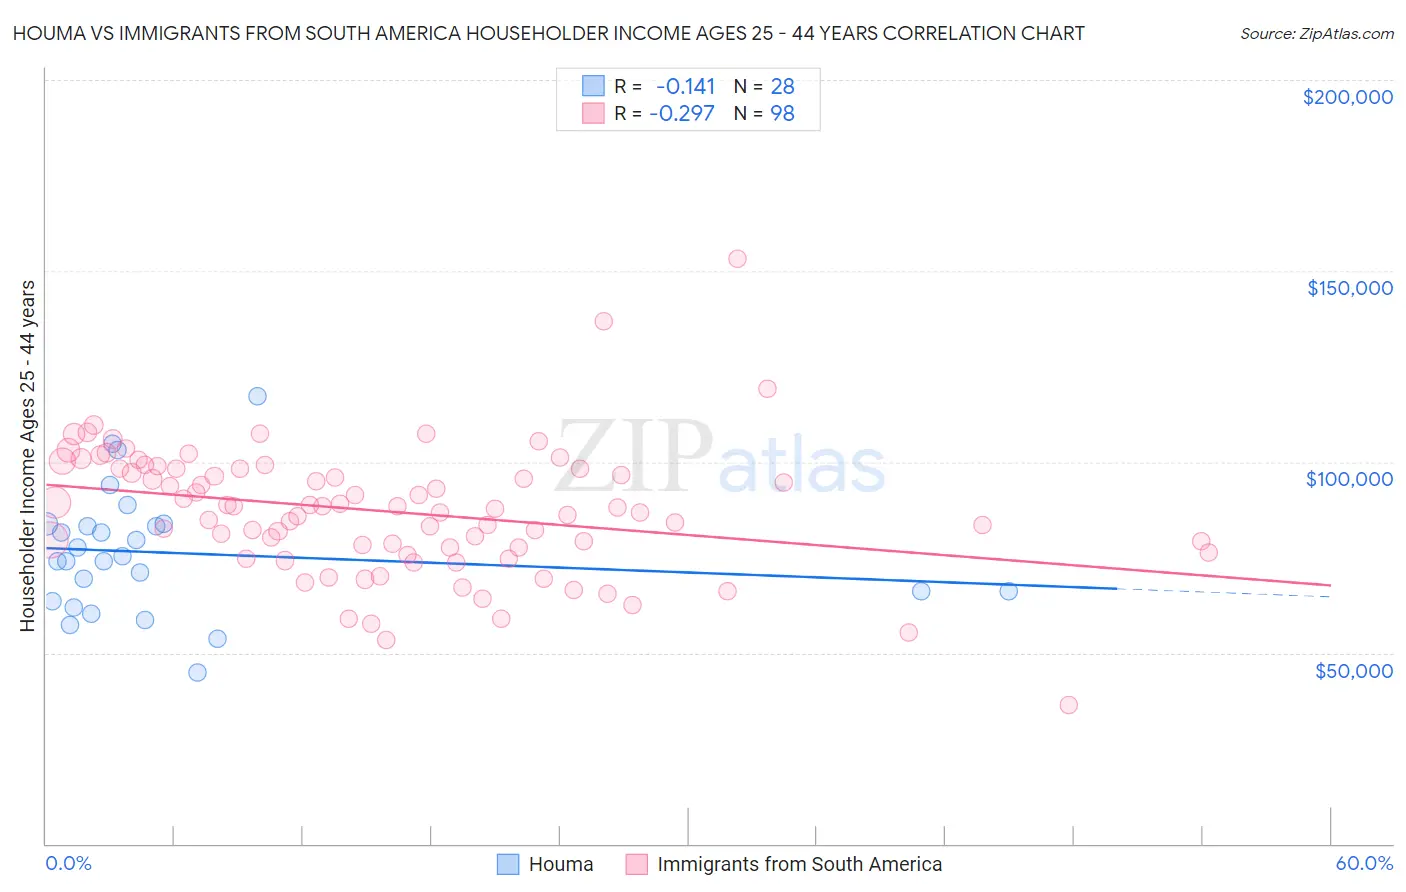 Houma vs Immigrants from South America Householder Income Ages 25 - 44 years